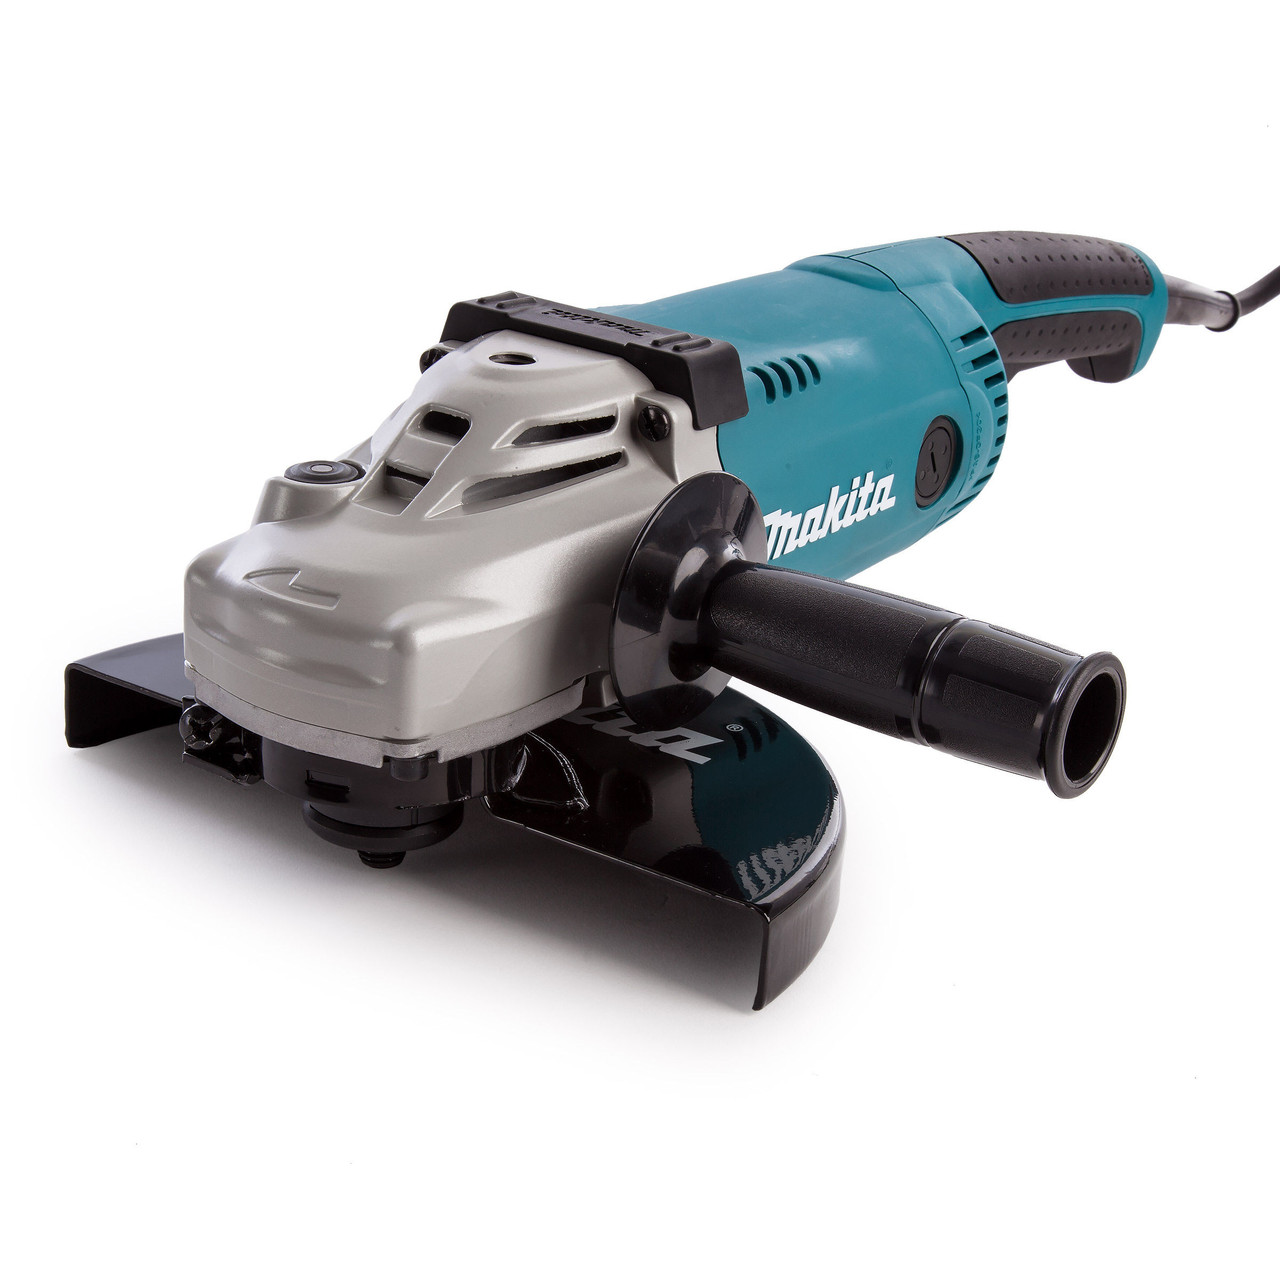 Makita GA9020S Angle Grinder with Soft Start 9in / 230mm 110V from Toolstop